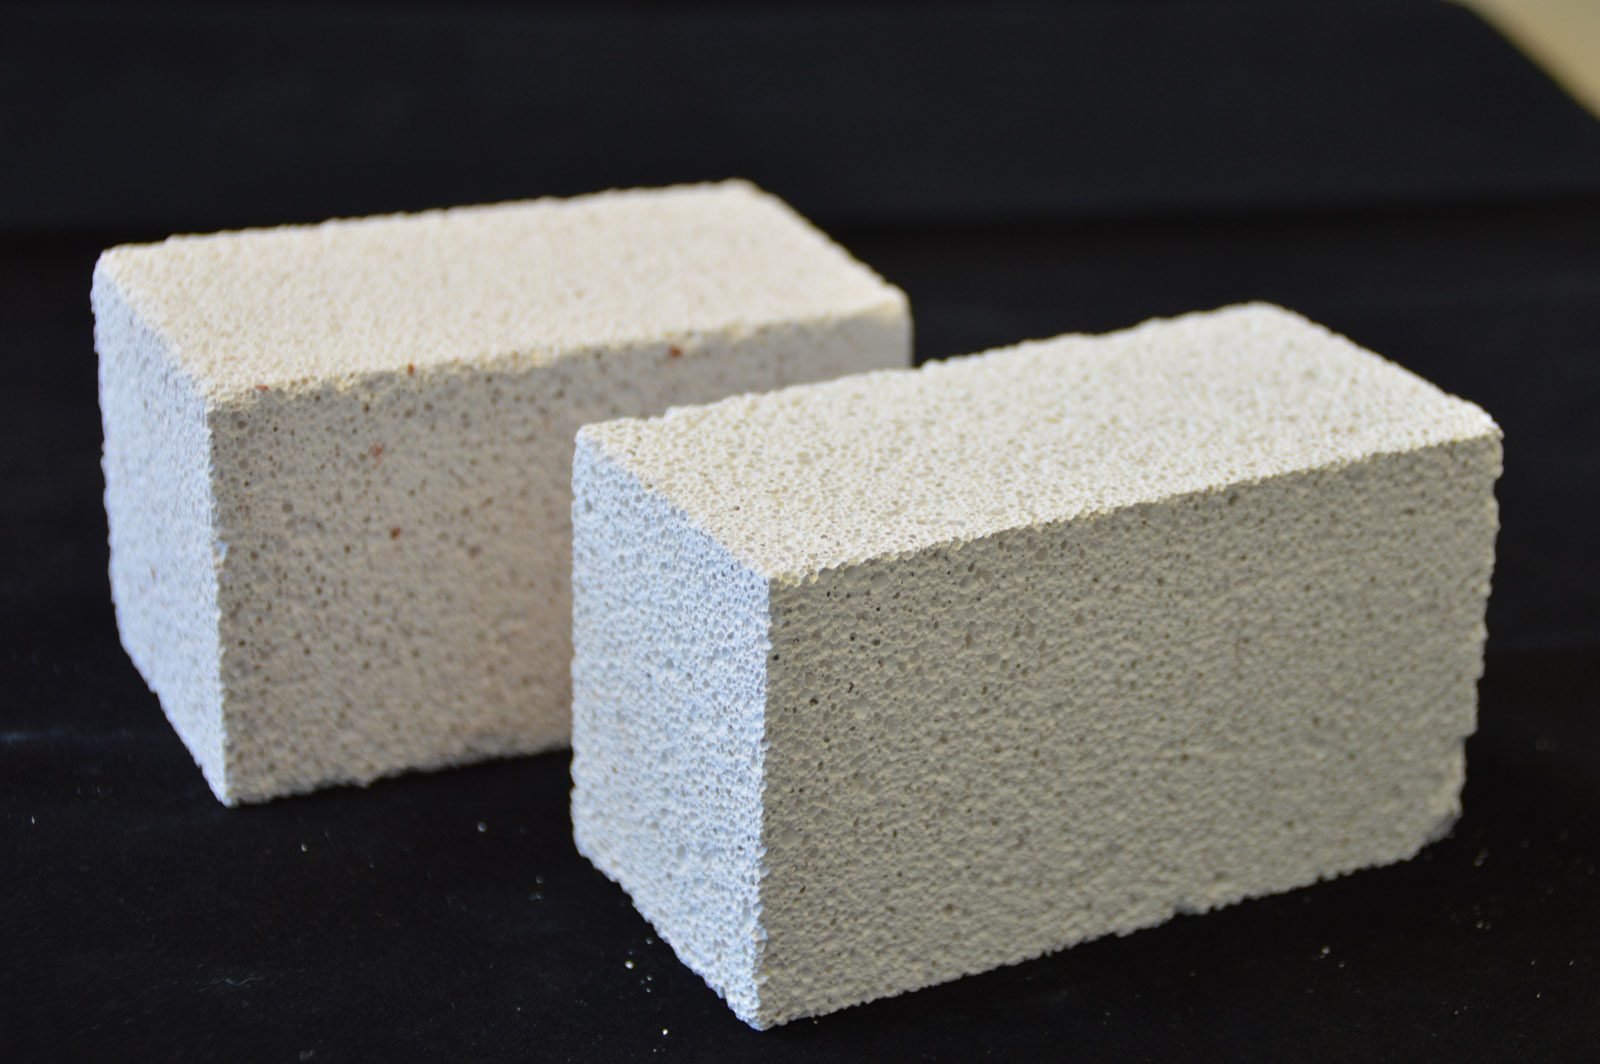 Aerated concrete made of brick (rear); aerated concrete made of sand-lime stones (front).